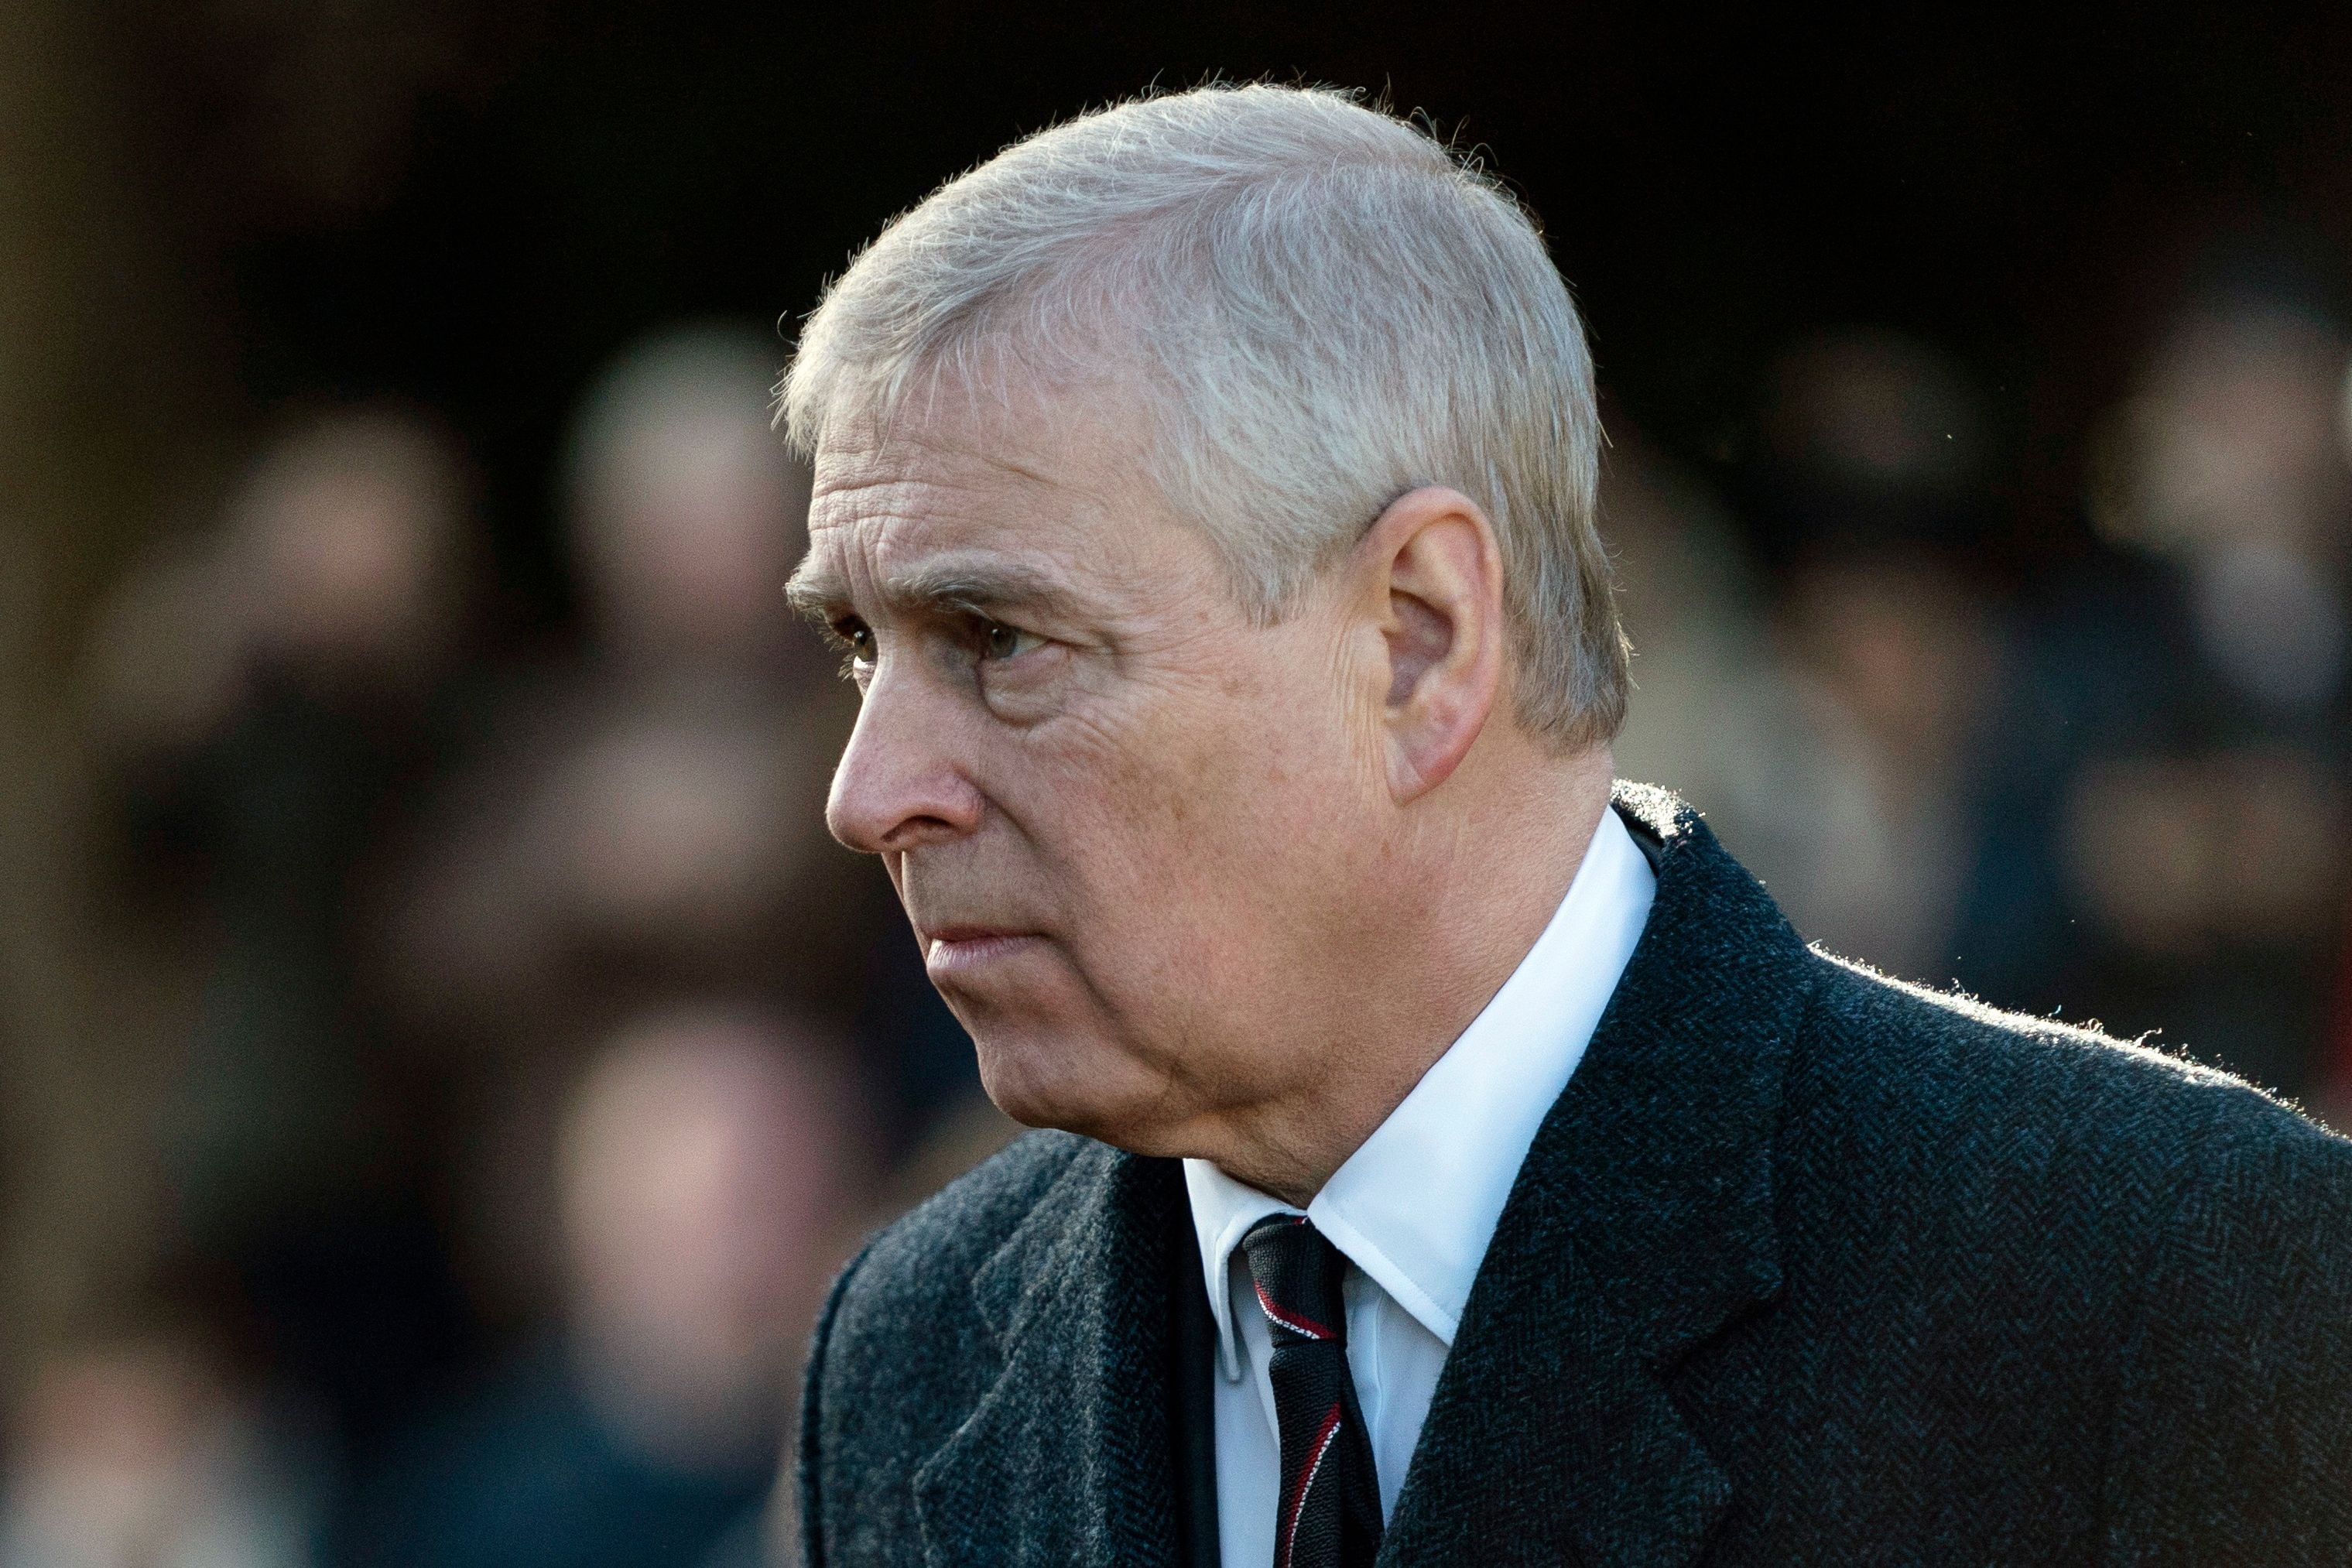 Prince Andrew sold luxurious property to pay for his trial for alleged sexual abuse